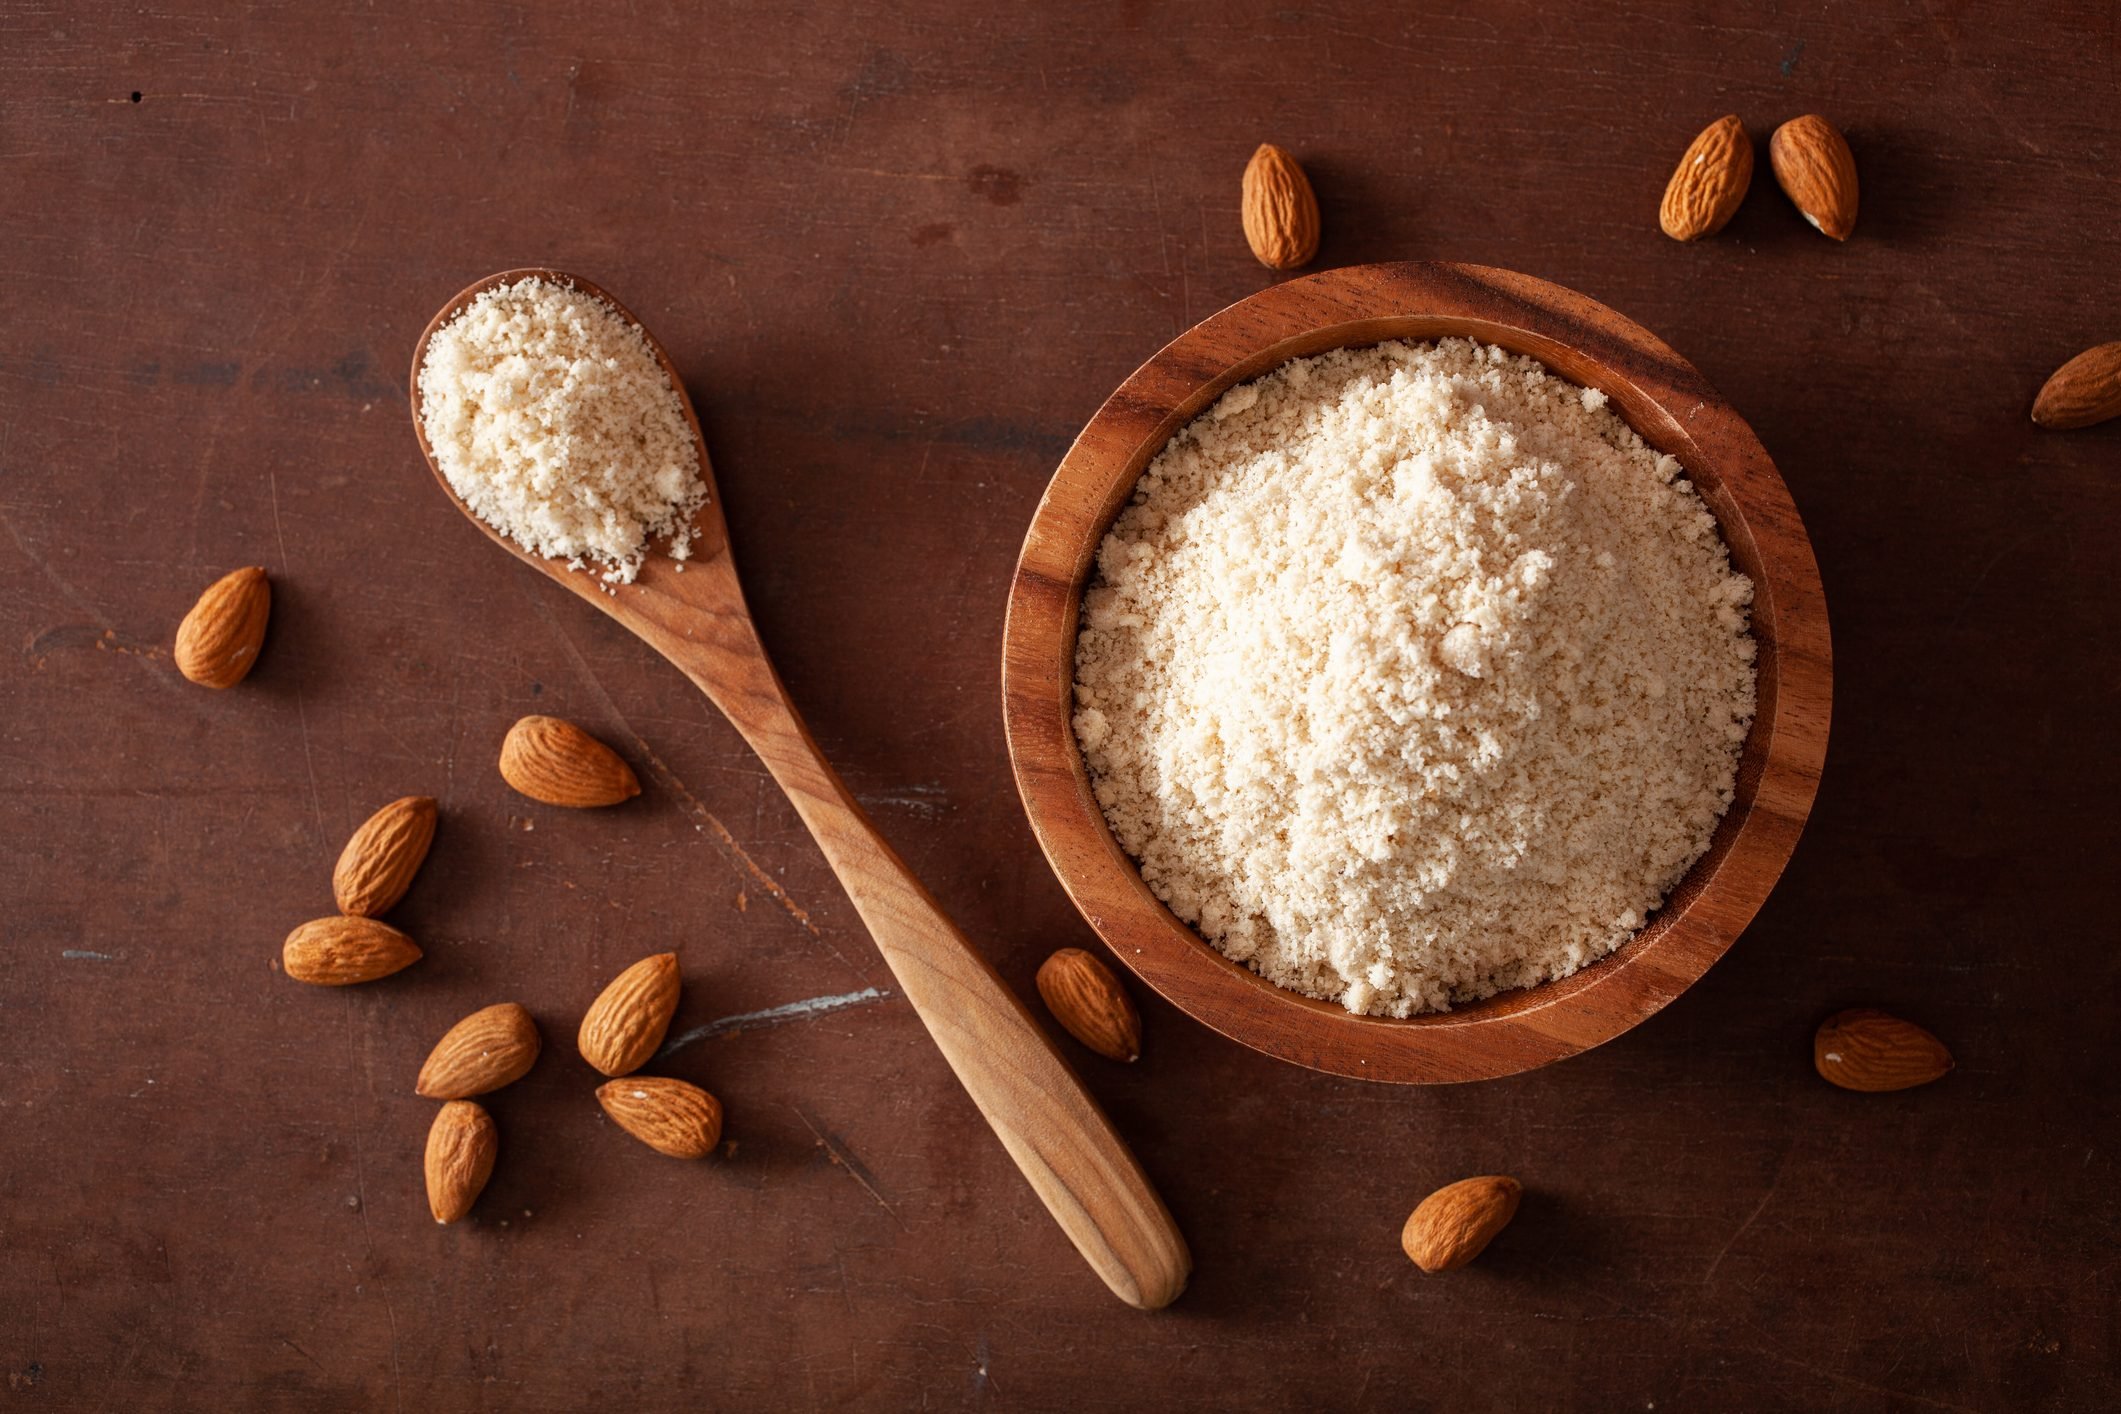 Is Almond Flour Healthy? Here's What a Nutritionist Says